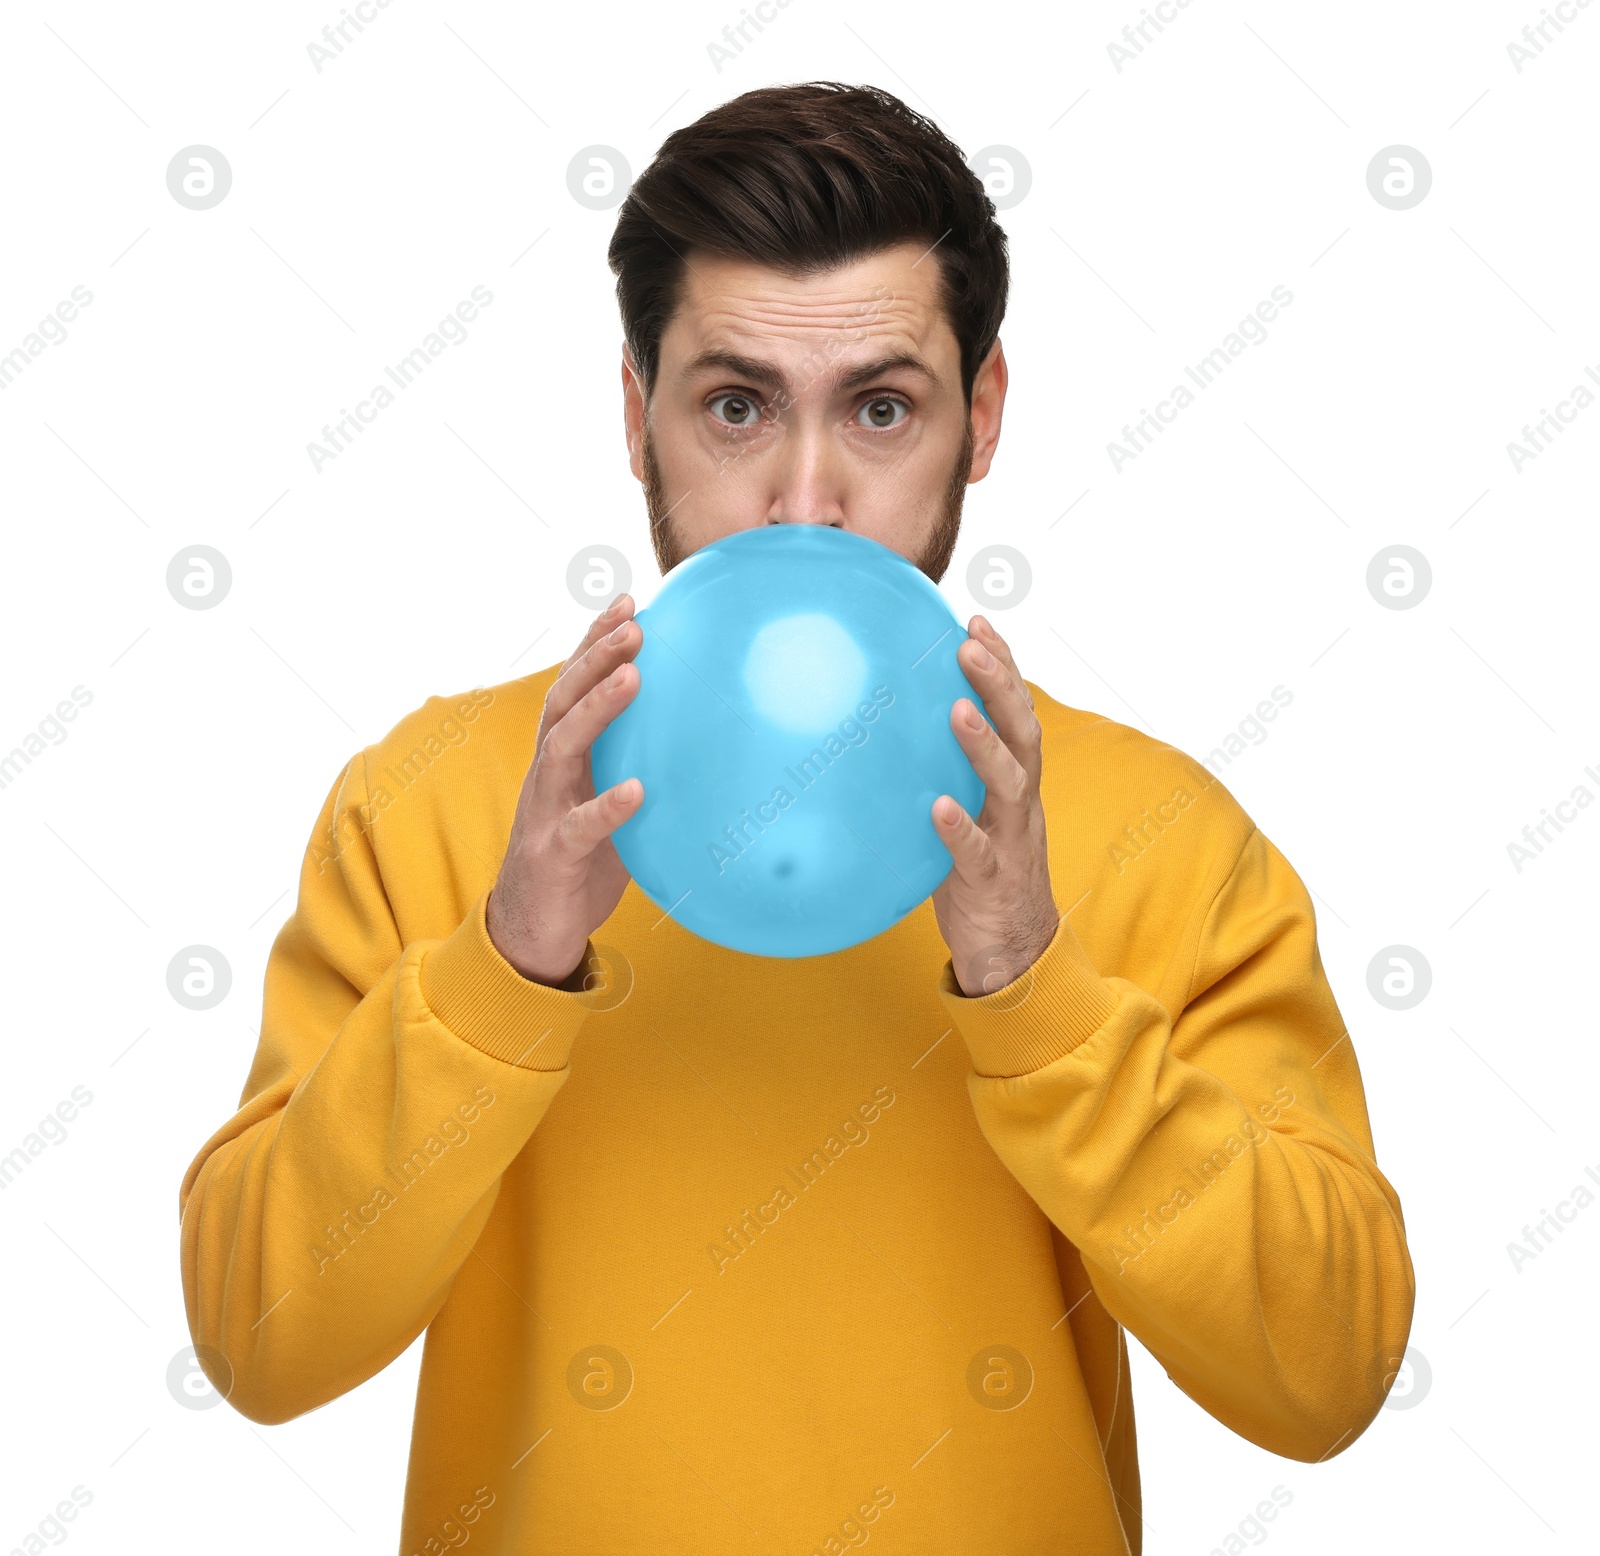 Photo of Man inflating light blue balloon on white background